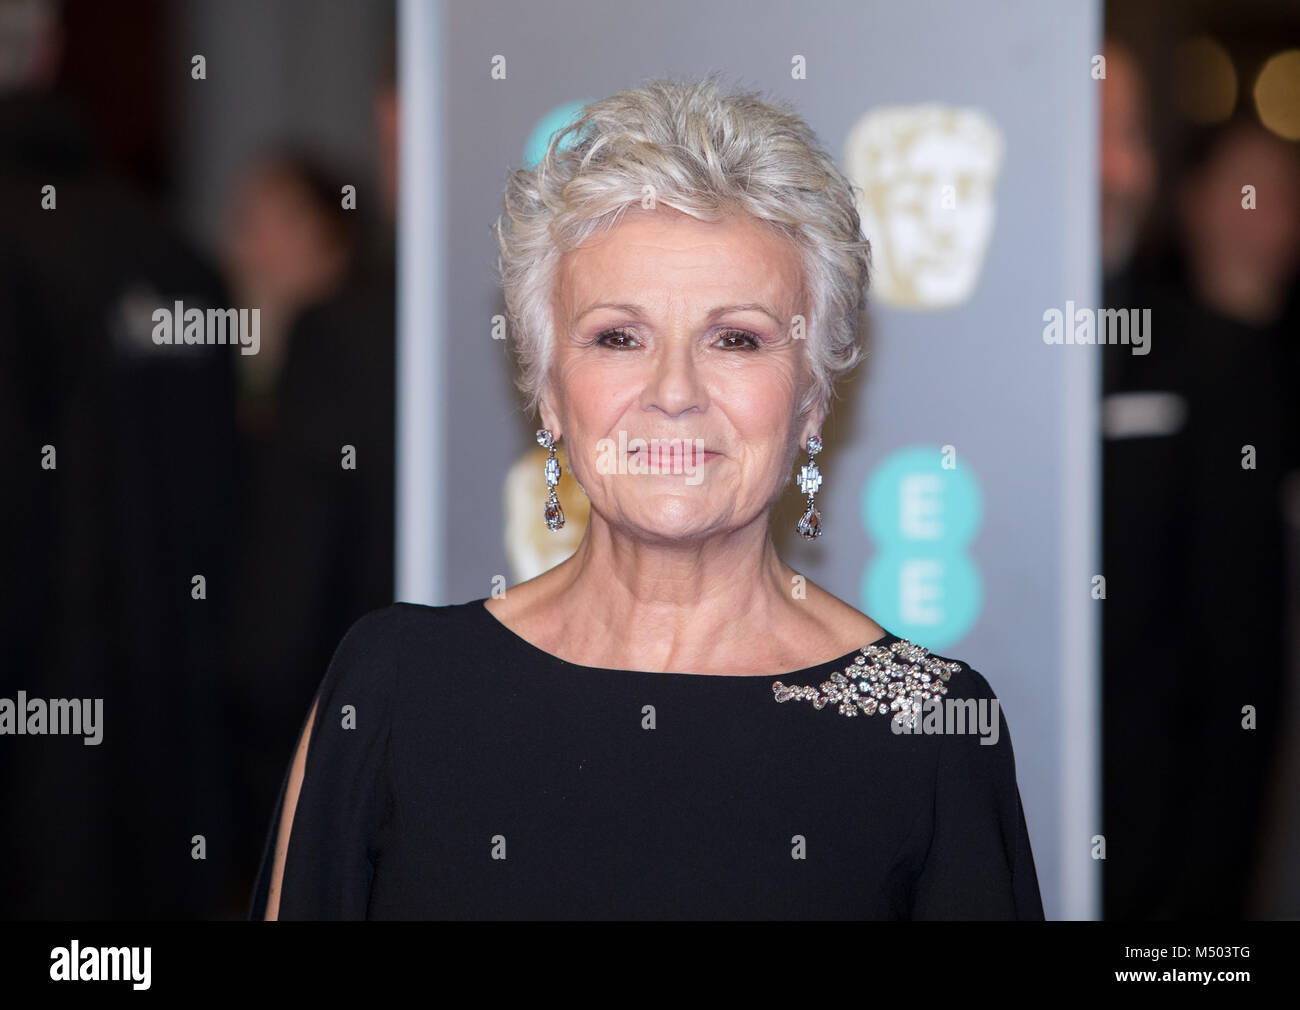 Julie Walters attends the EE British Academy Film Awards, Bafta Awards, at the Royal Albert Hall in London, England, Great Britain, on 18 February 2018. - NO WIRE SERVICE - Photo: Hubert Boesl/Hubert Boesl/dpa Stock Photo